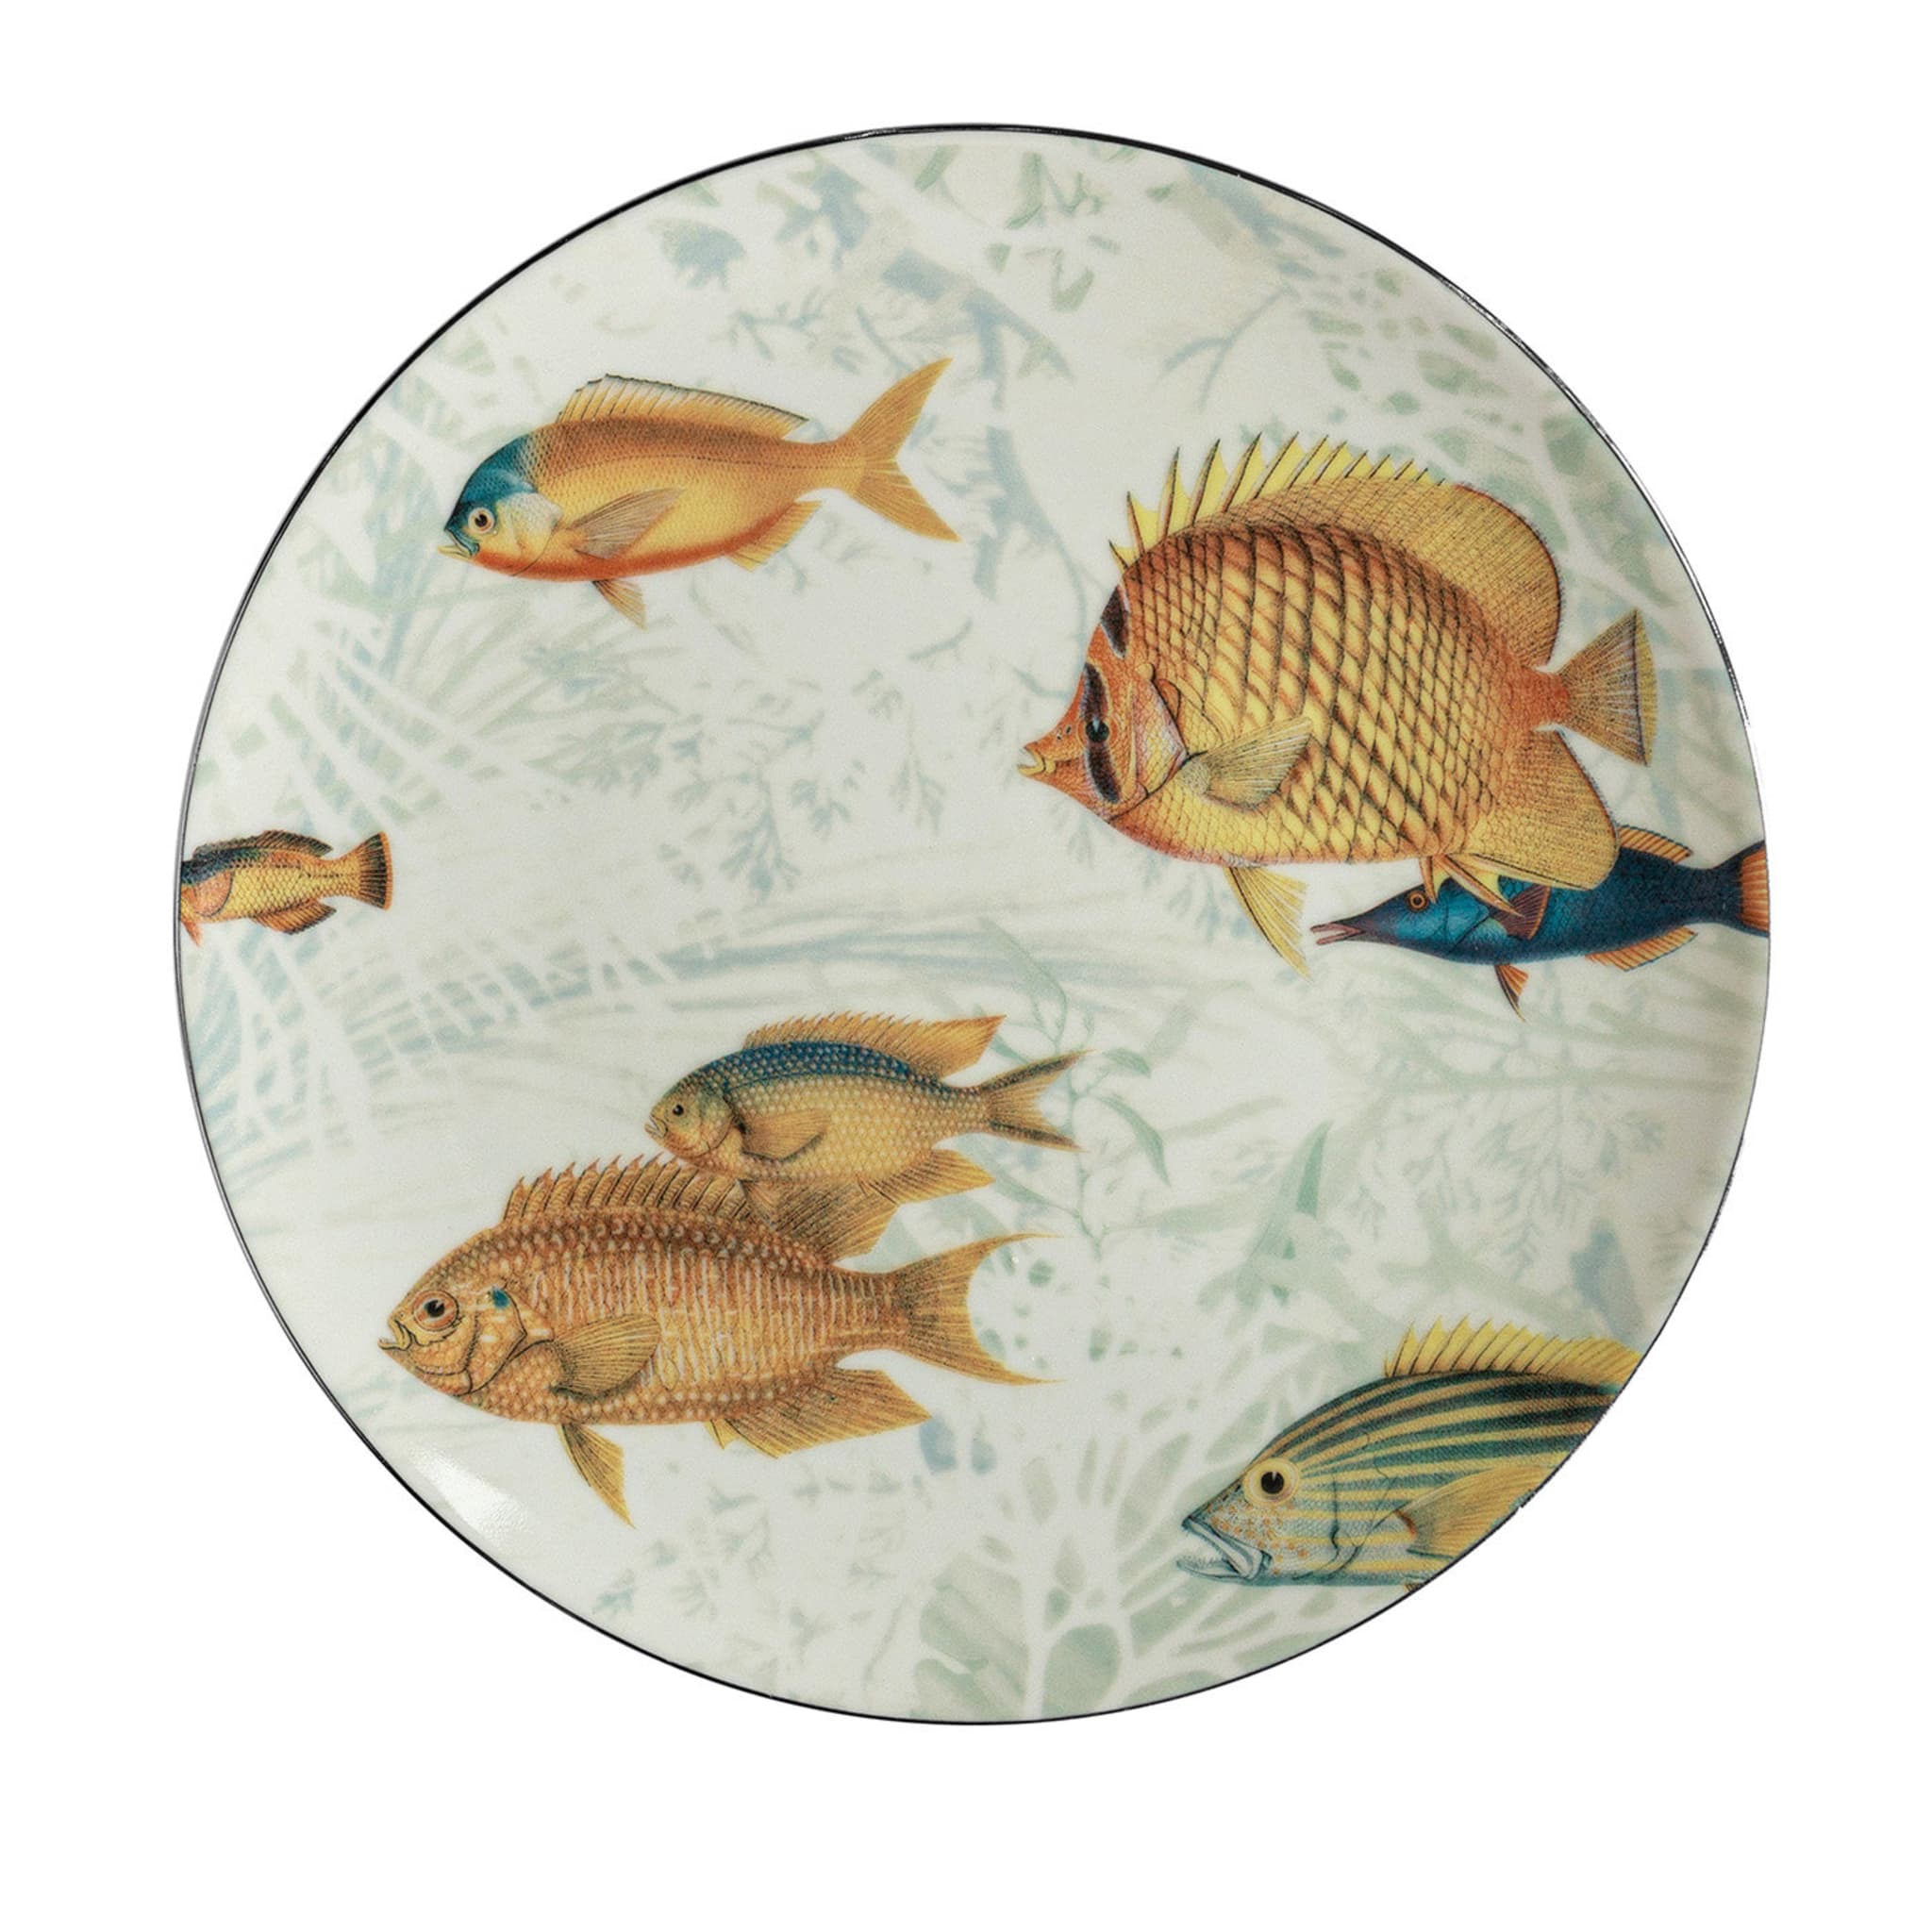 Amami Set Of 2 Porcelain Dessert Plates With Tropical Fish #2 - Main view